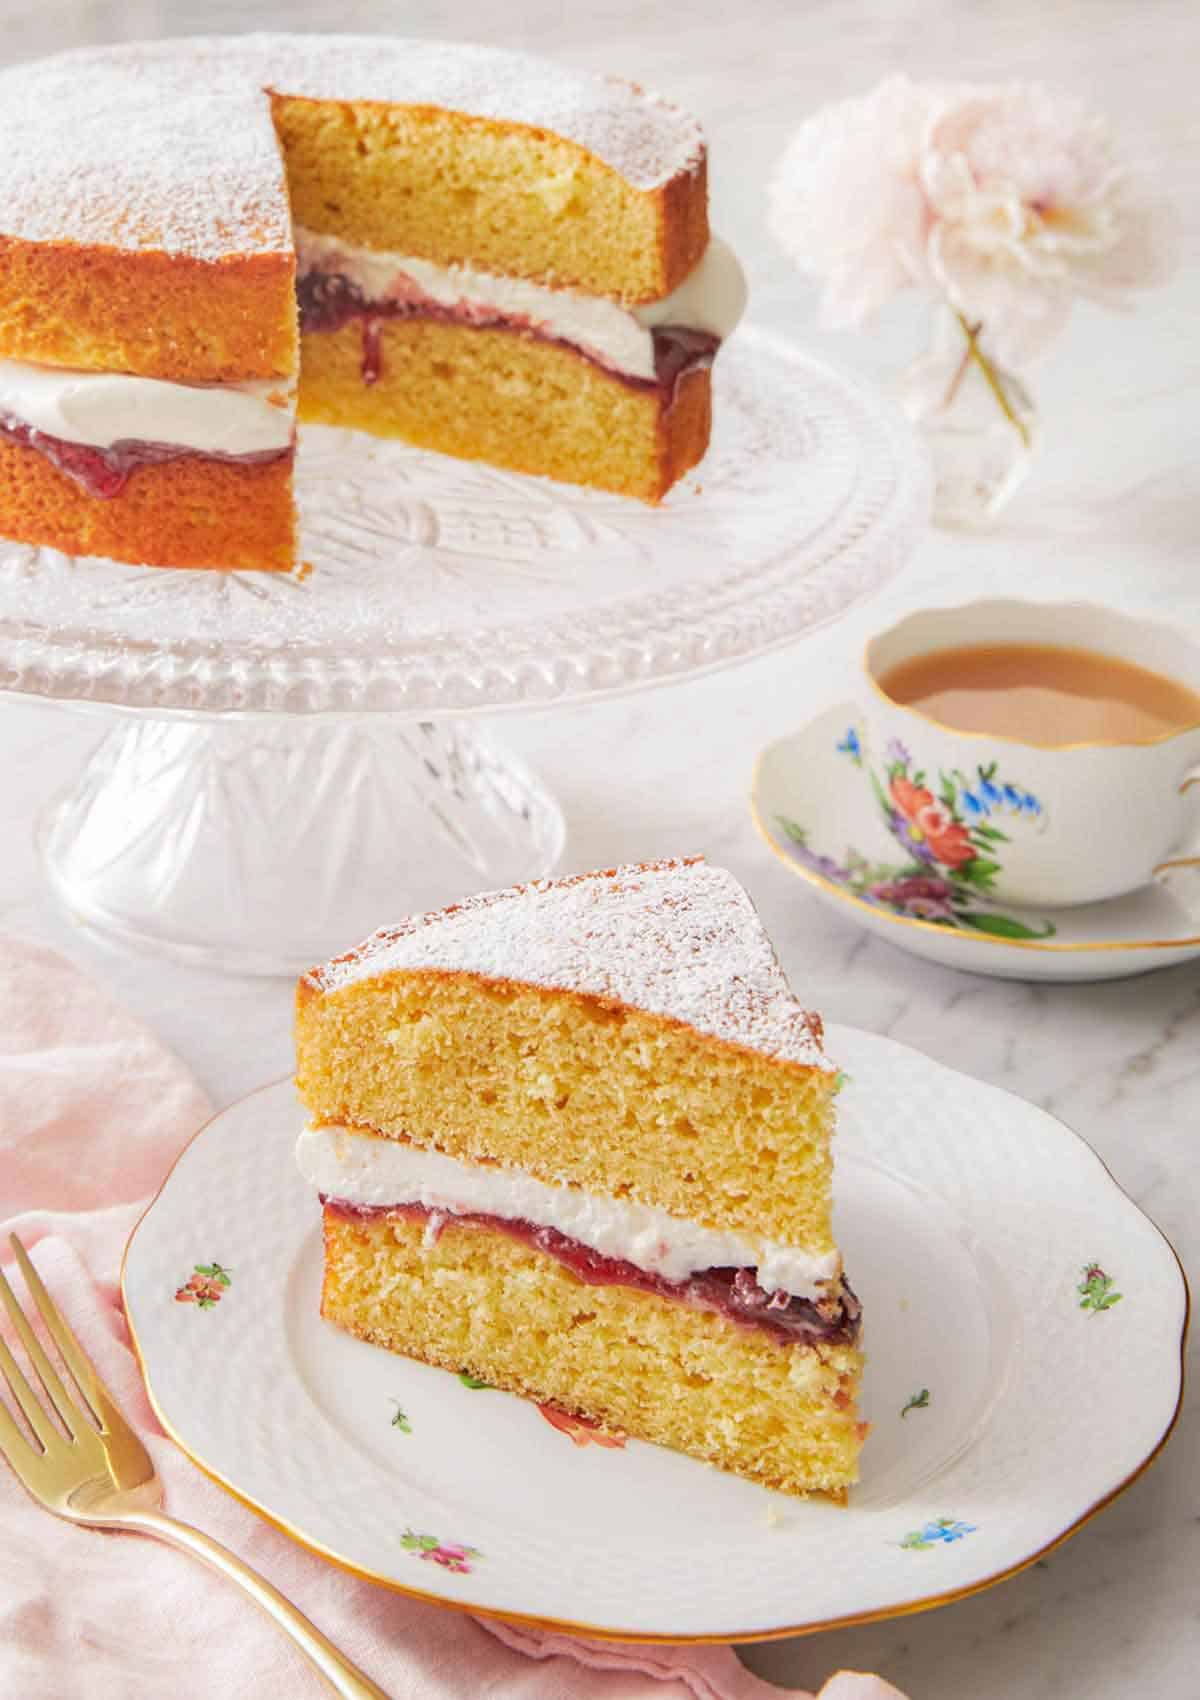 A plate with a slice of Victoria sponge cake in front of a cup of coffee and the rest of the cake.